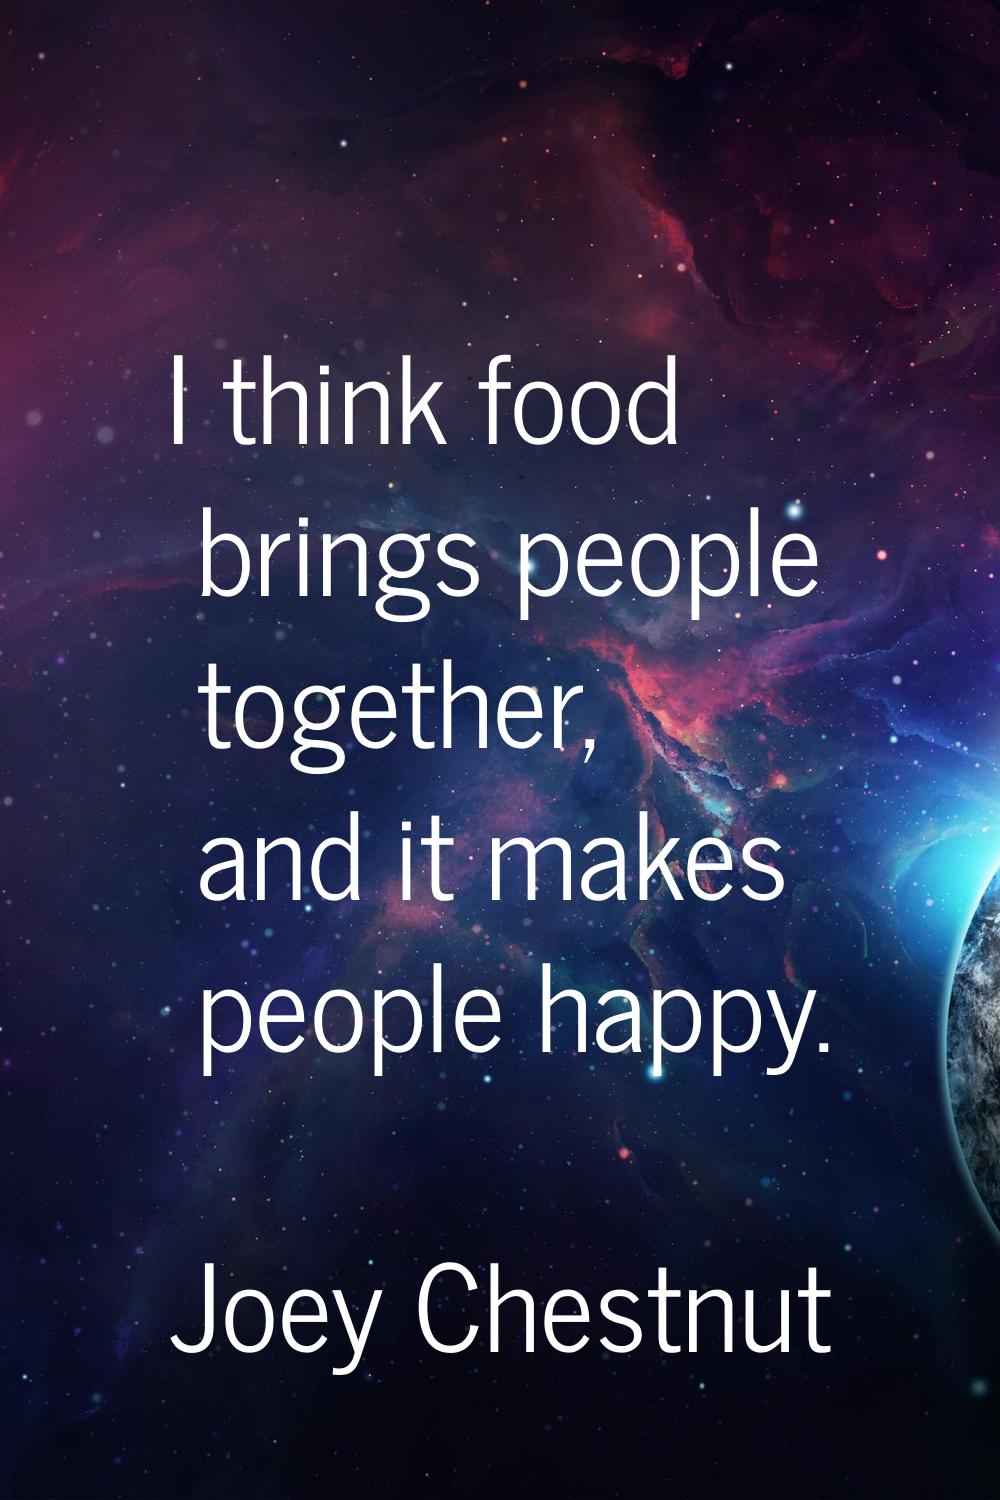 I think food brings people together, and it makes people happy.